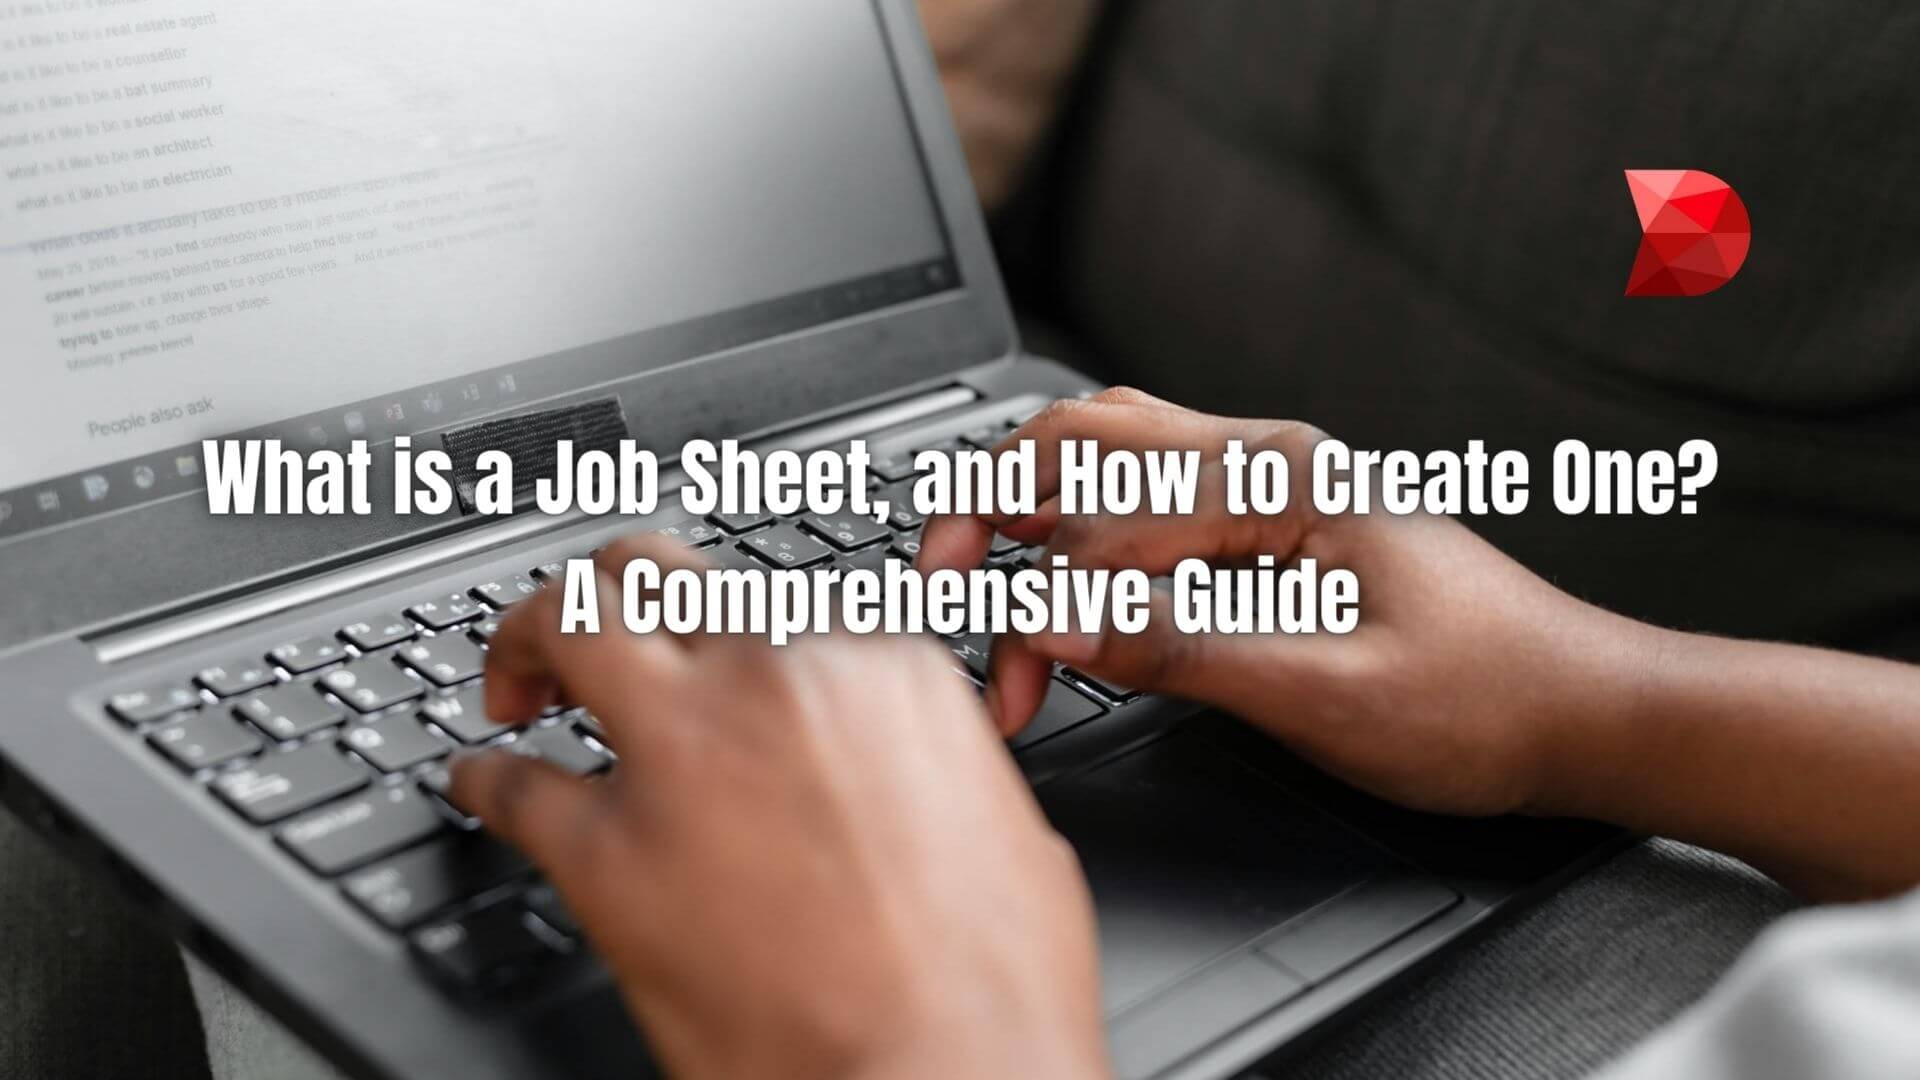 Unlock the secrets of effective job sheet creation. Learn the ins and outs of what it takes to craft a job sheet from start to finish.